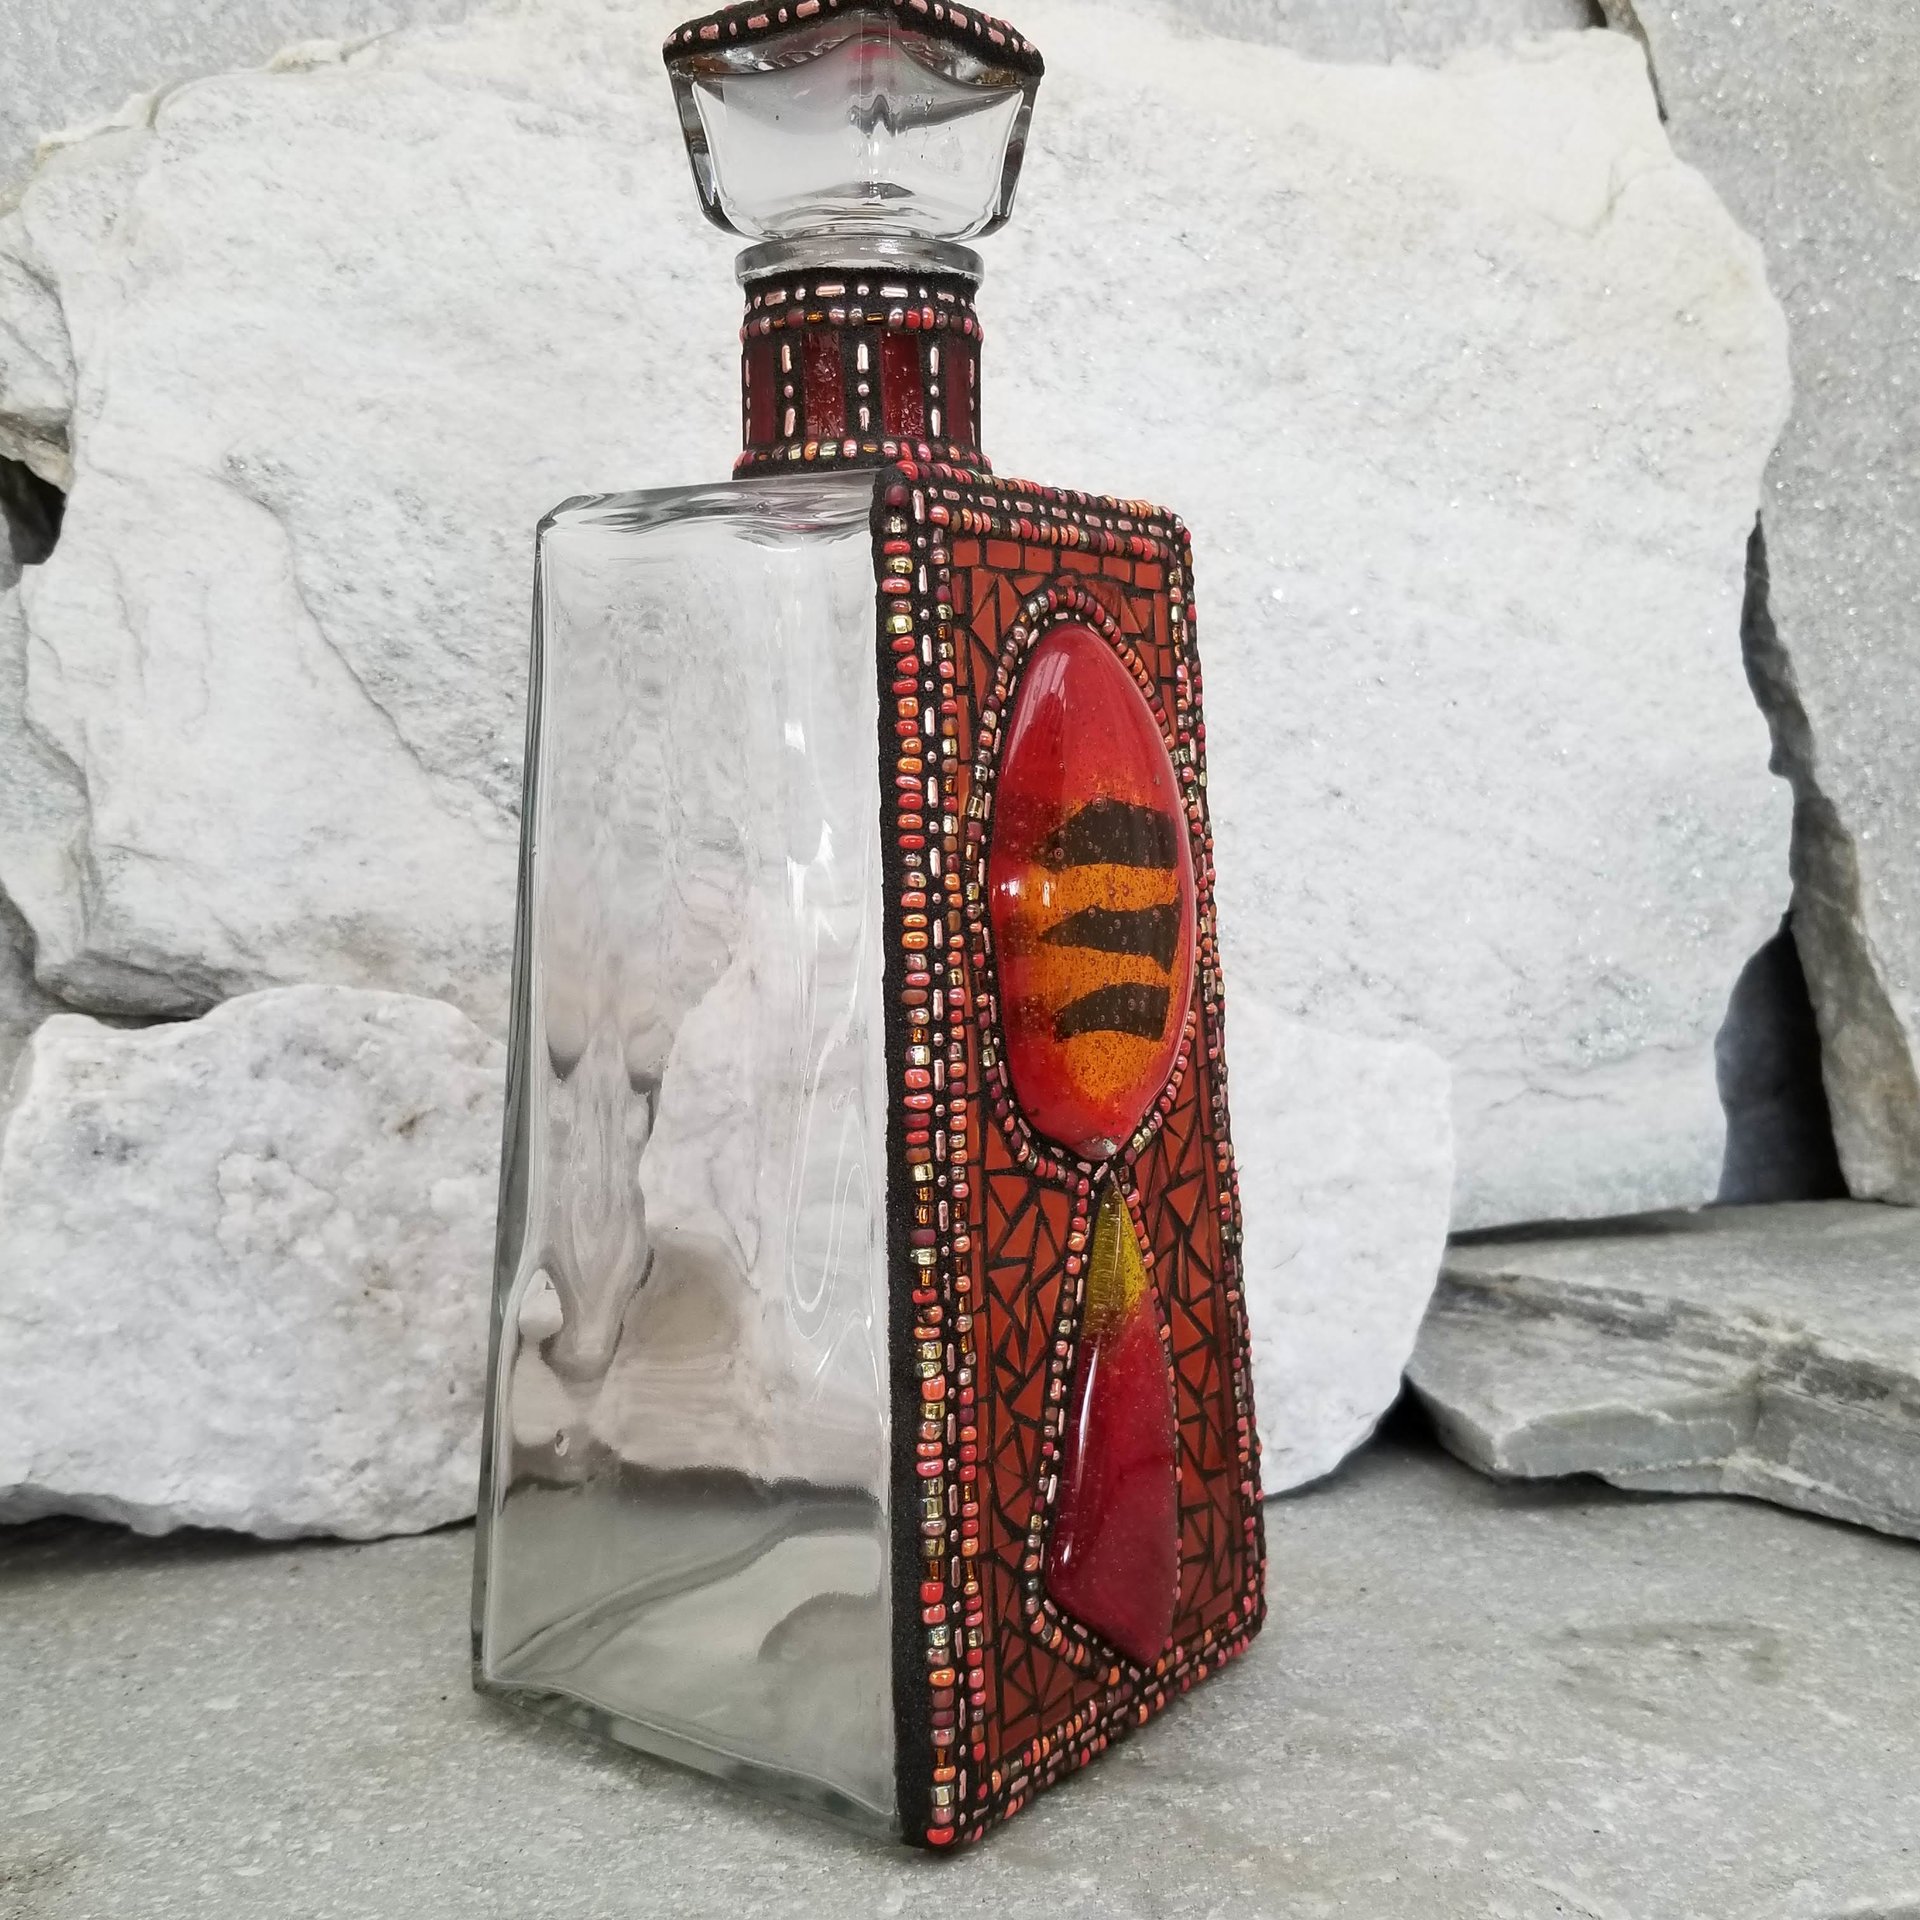 Mosaic Liquor Bottle “On Fire” Up-cycled Decanter